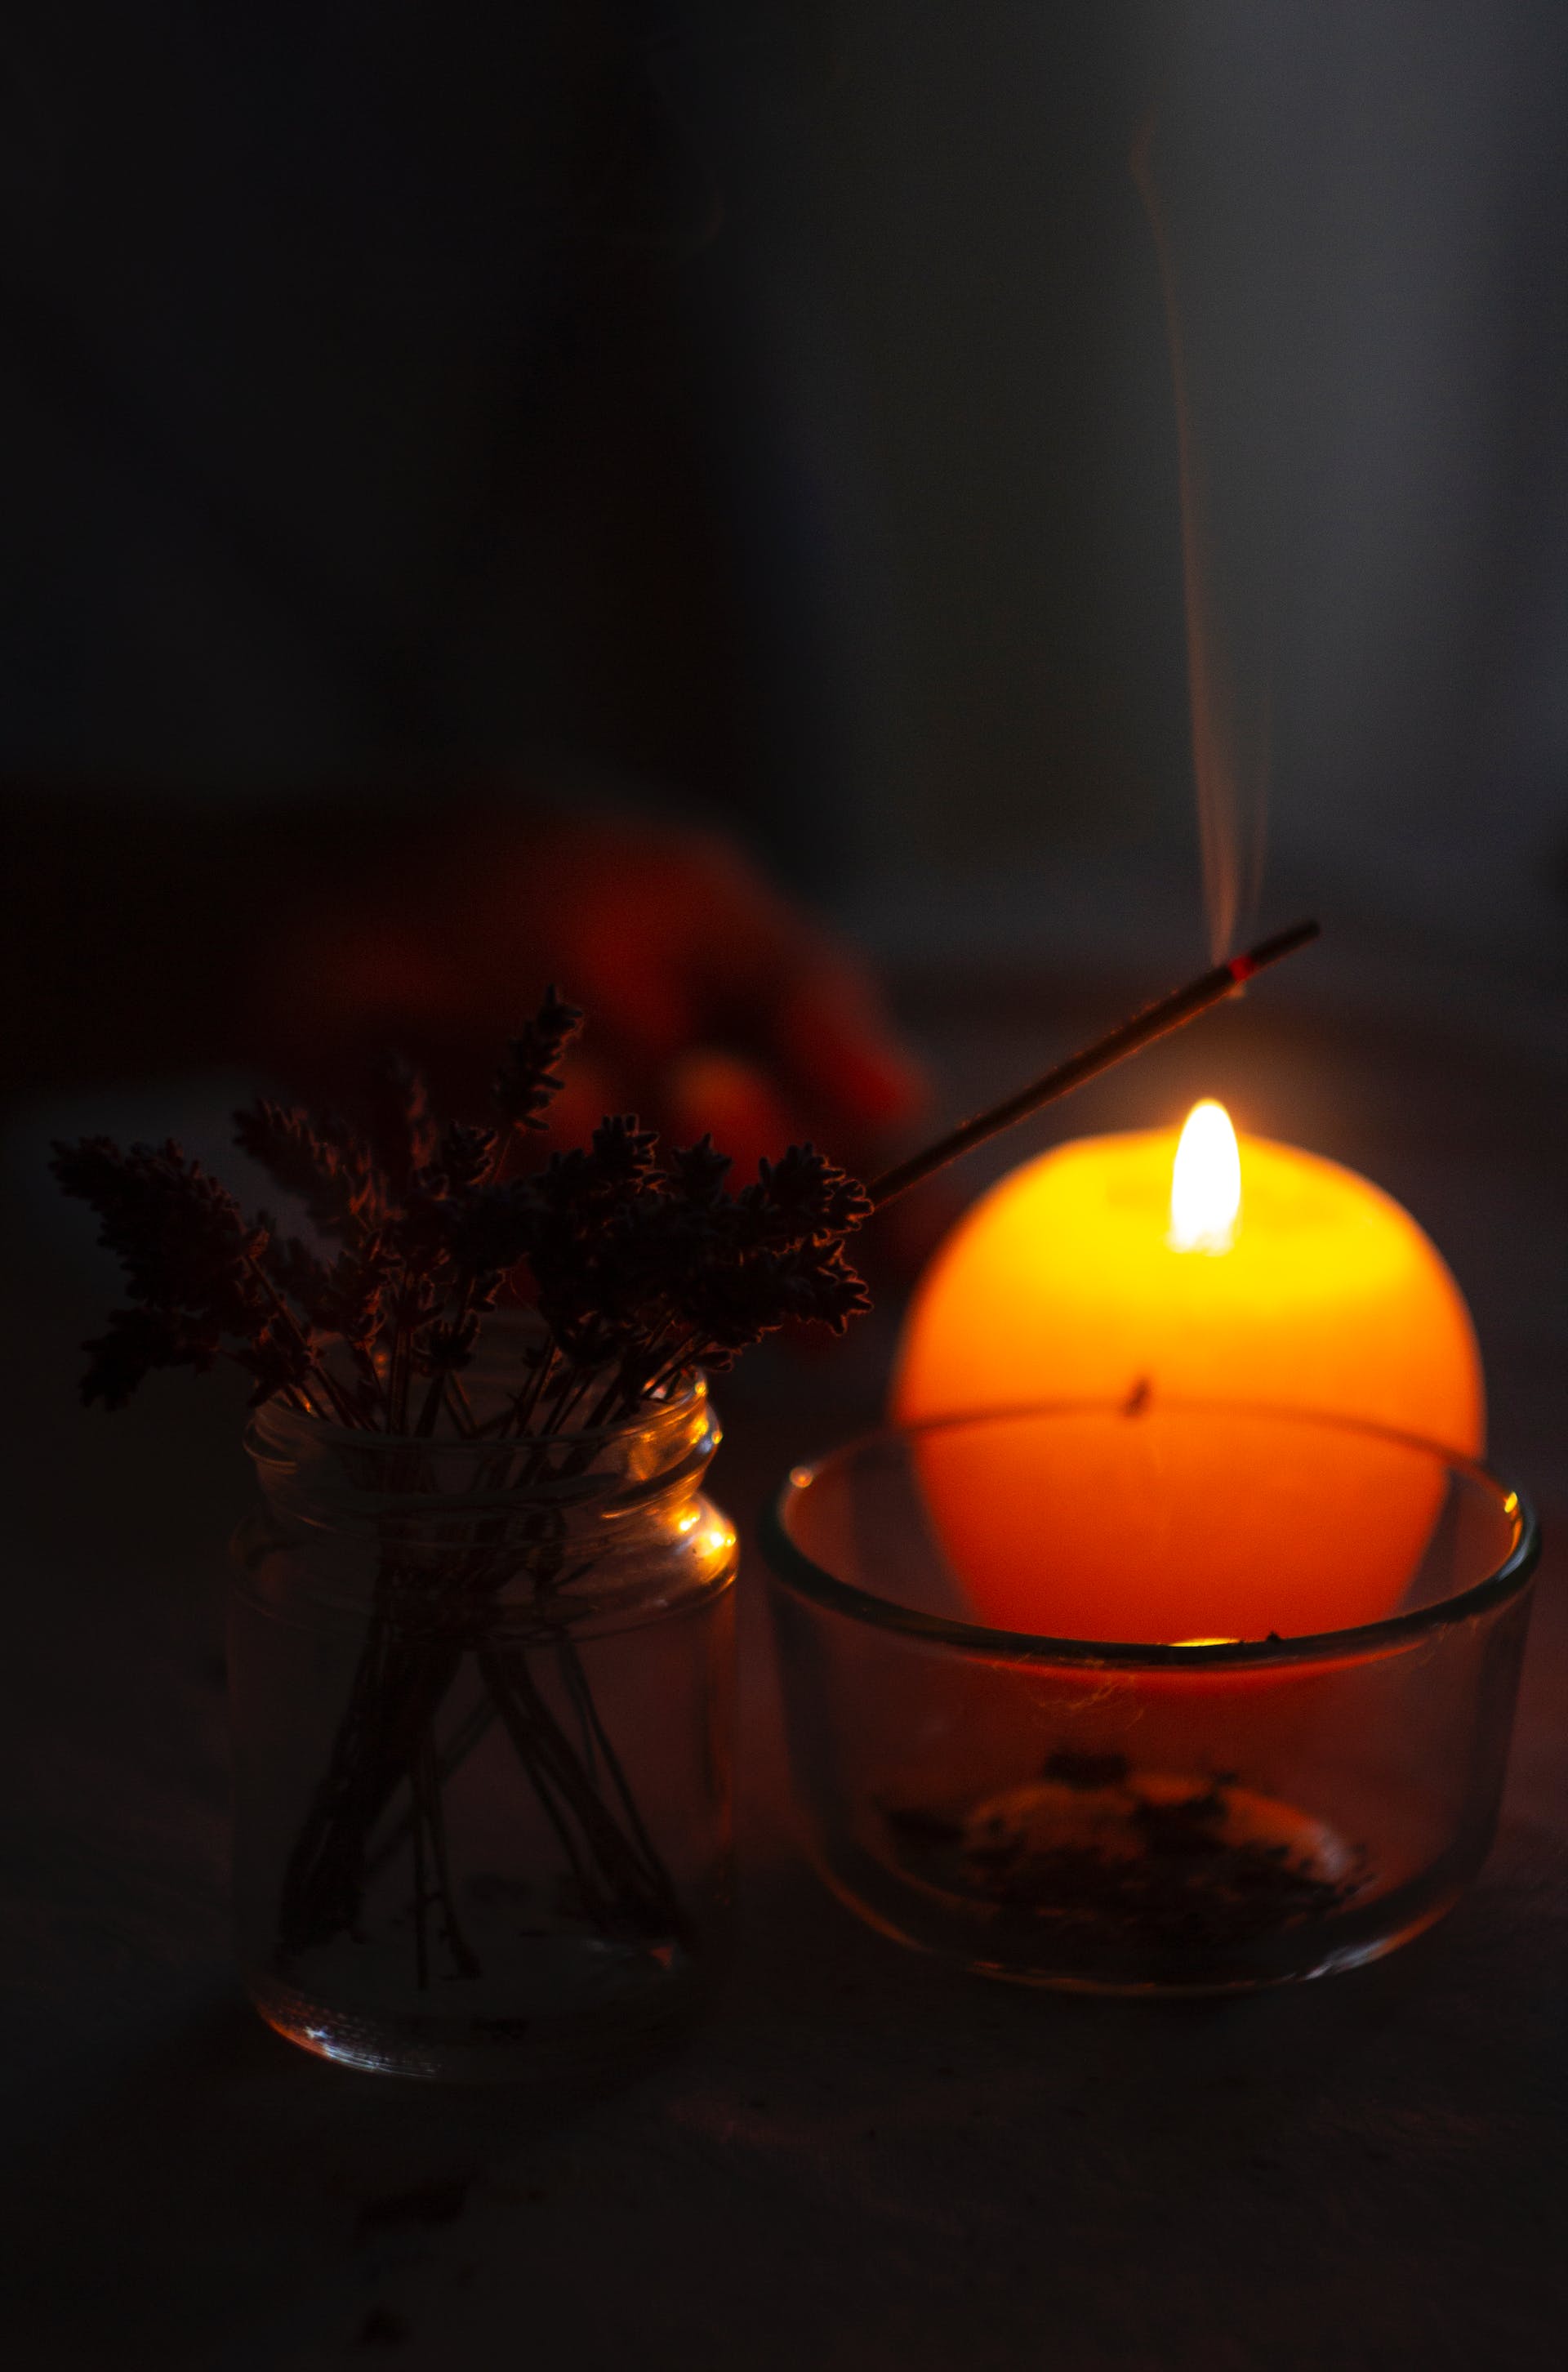 Some lit incense and a lit candle | Source: Pexels